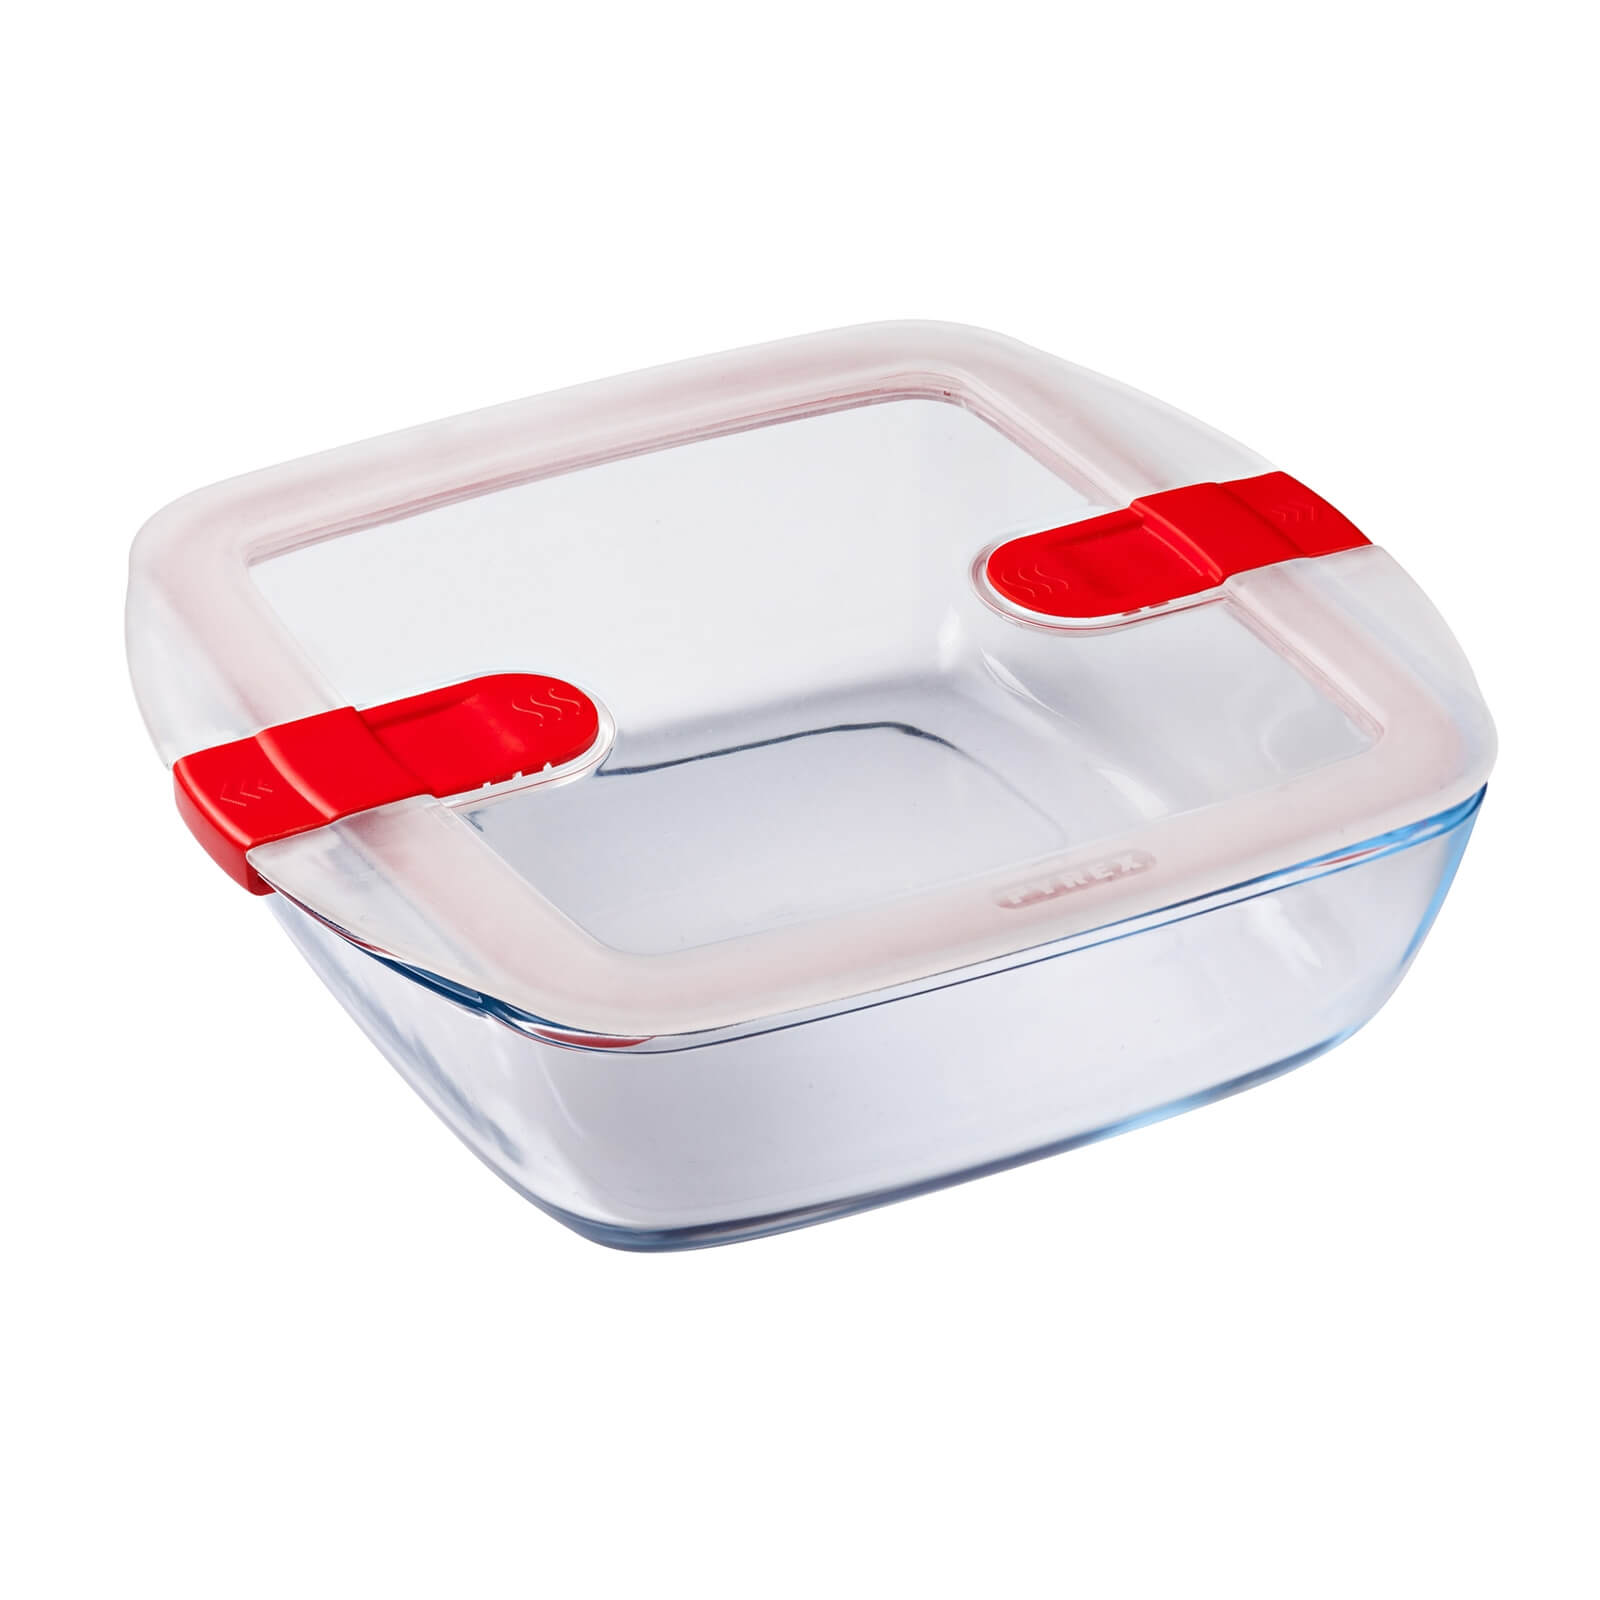 Photo of Pyrex Cook & Heat Square Dish With Lid